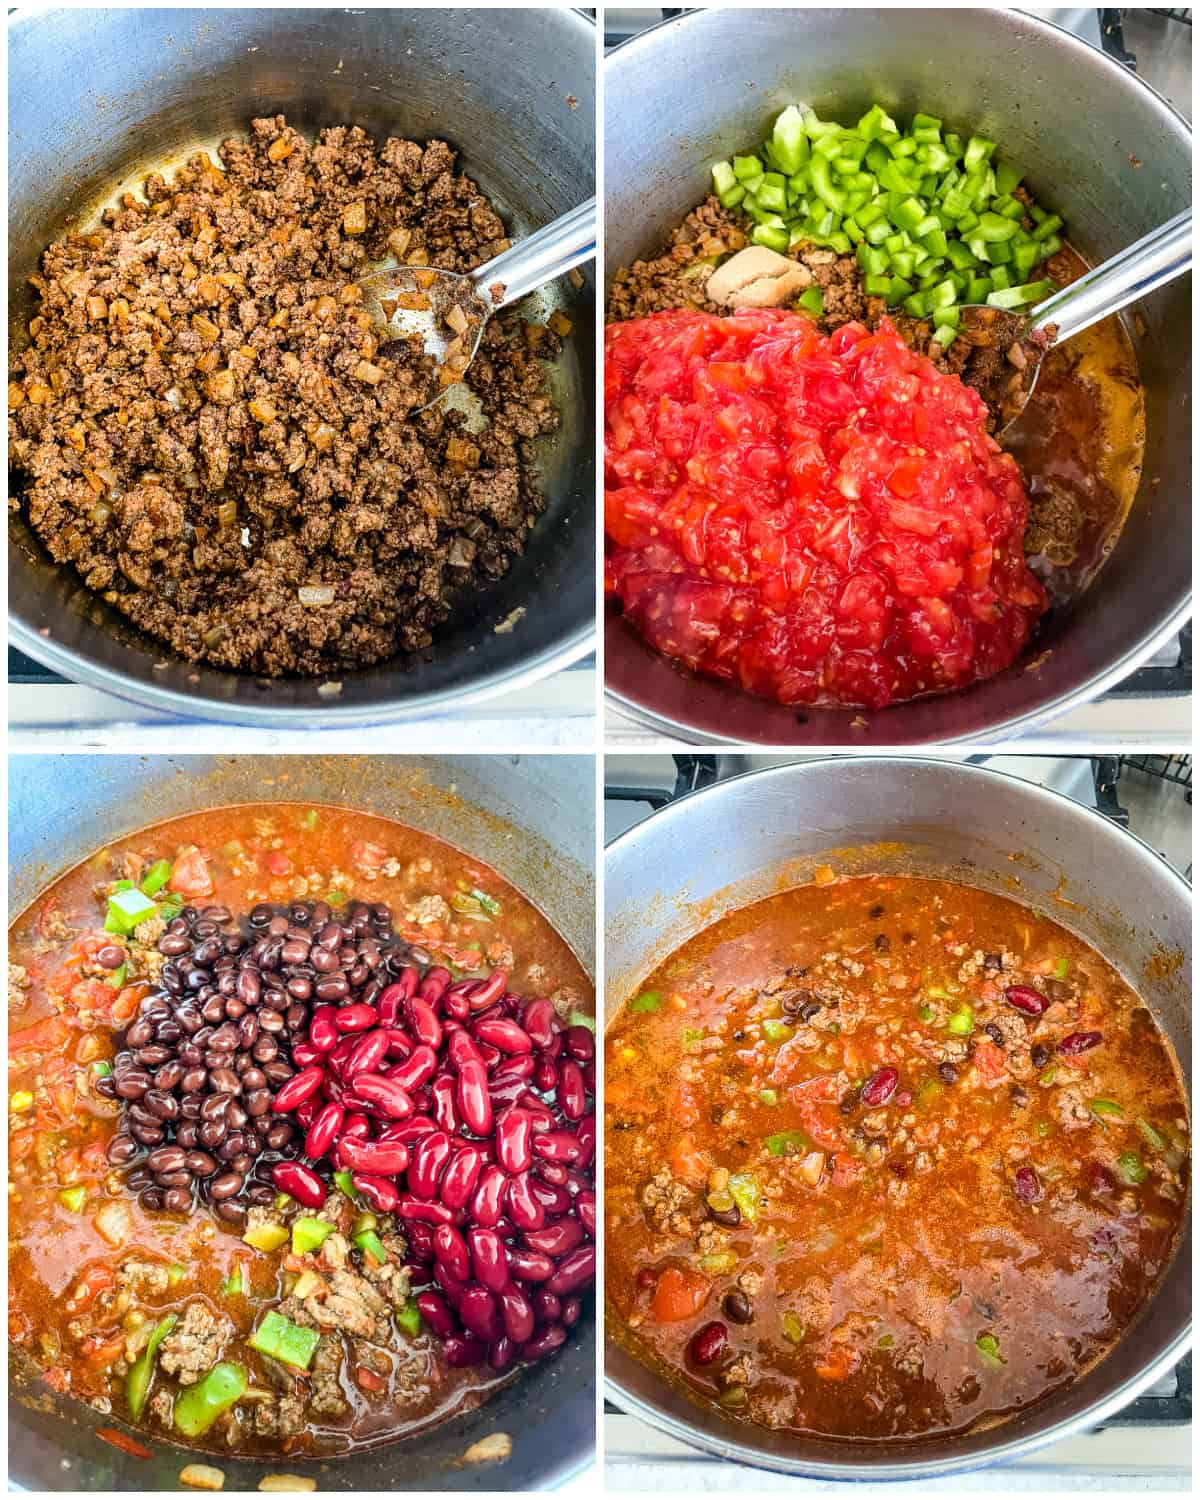 process shots - adding ingredients and simmering chili